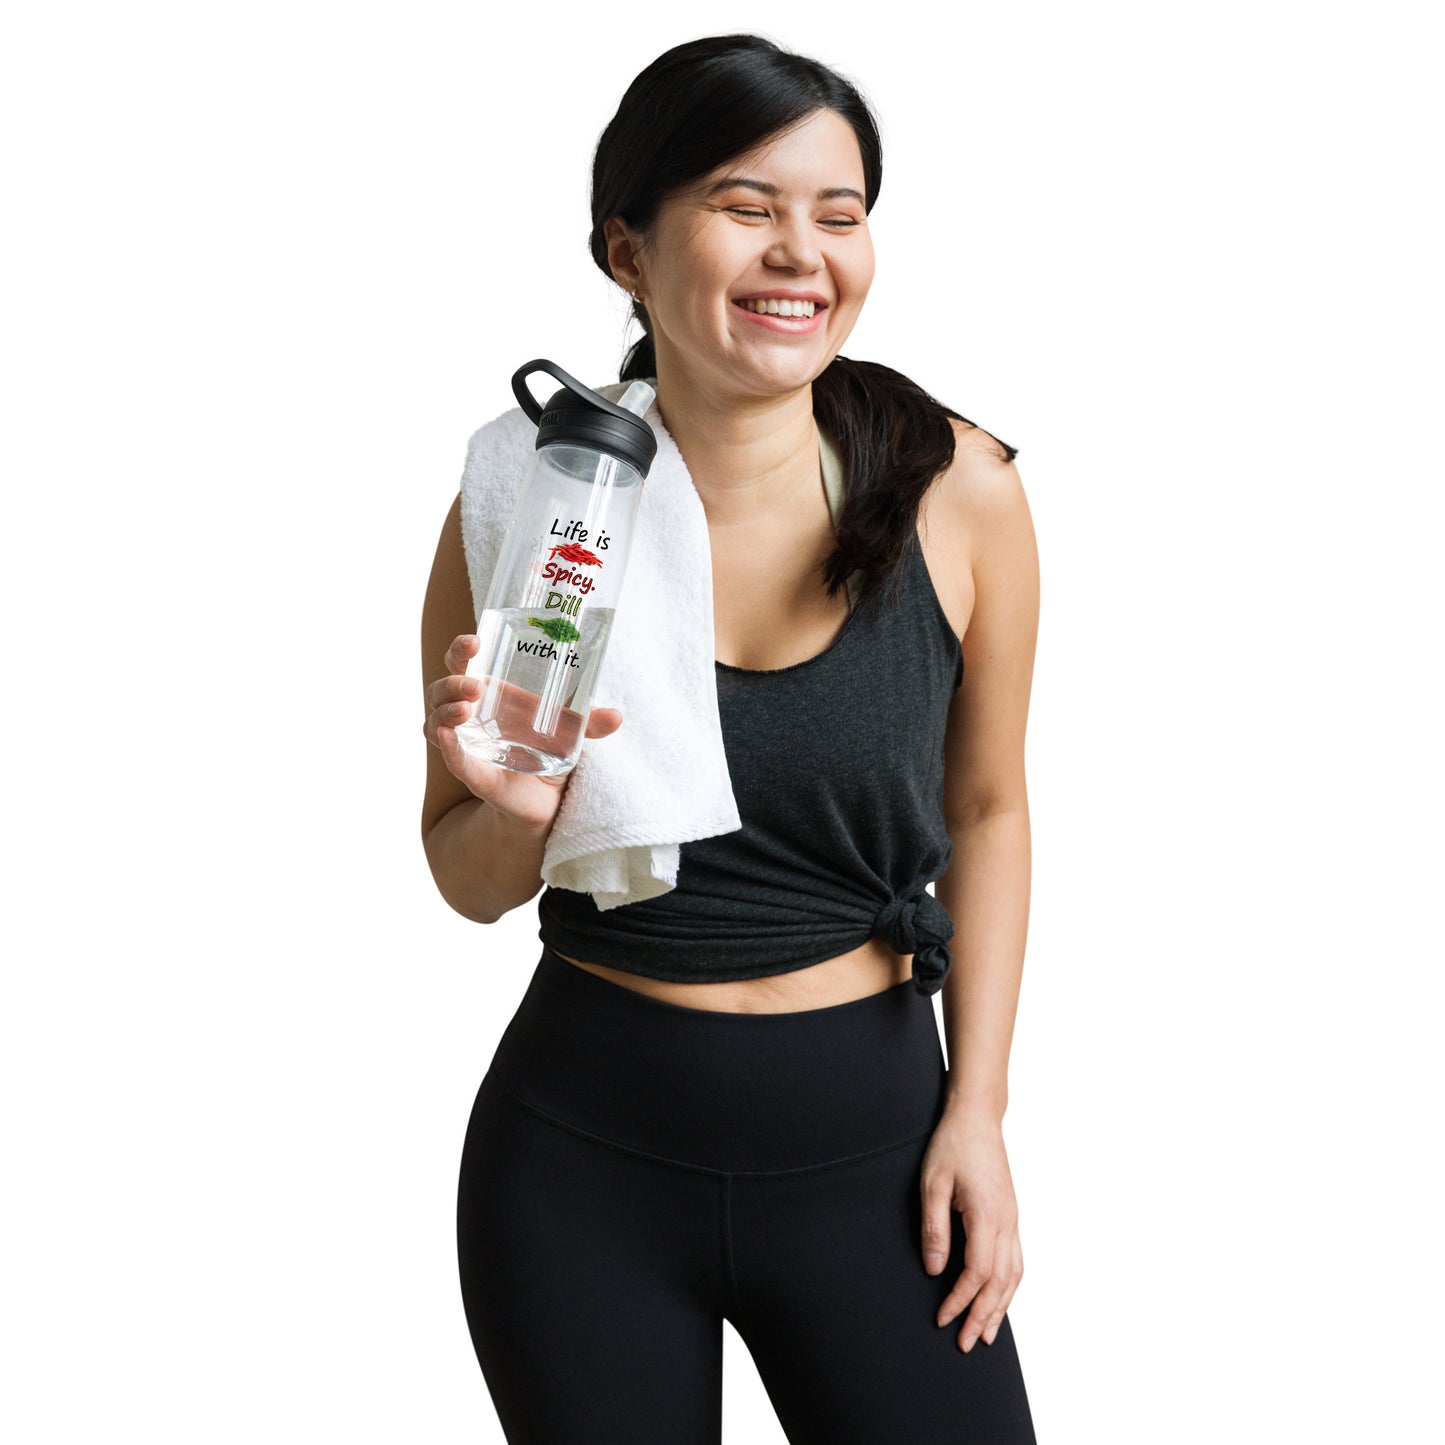 25 ounce sports water bottle with spill-proof lid and bite valve. Clear stain and odor-resistant BPA-free plastic. Features double-sided design of "Life is spicy. Dill with it" phrase with peppers and dill weed images. Shown in gym model's hand.